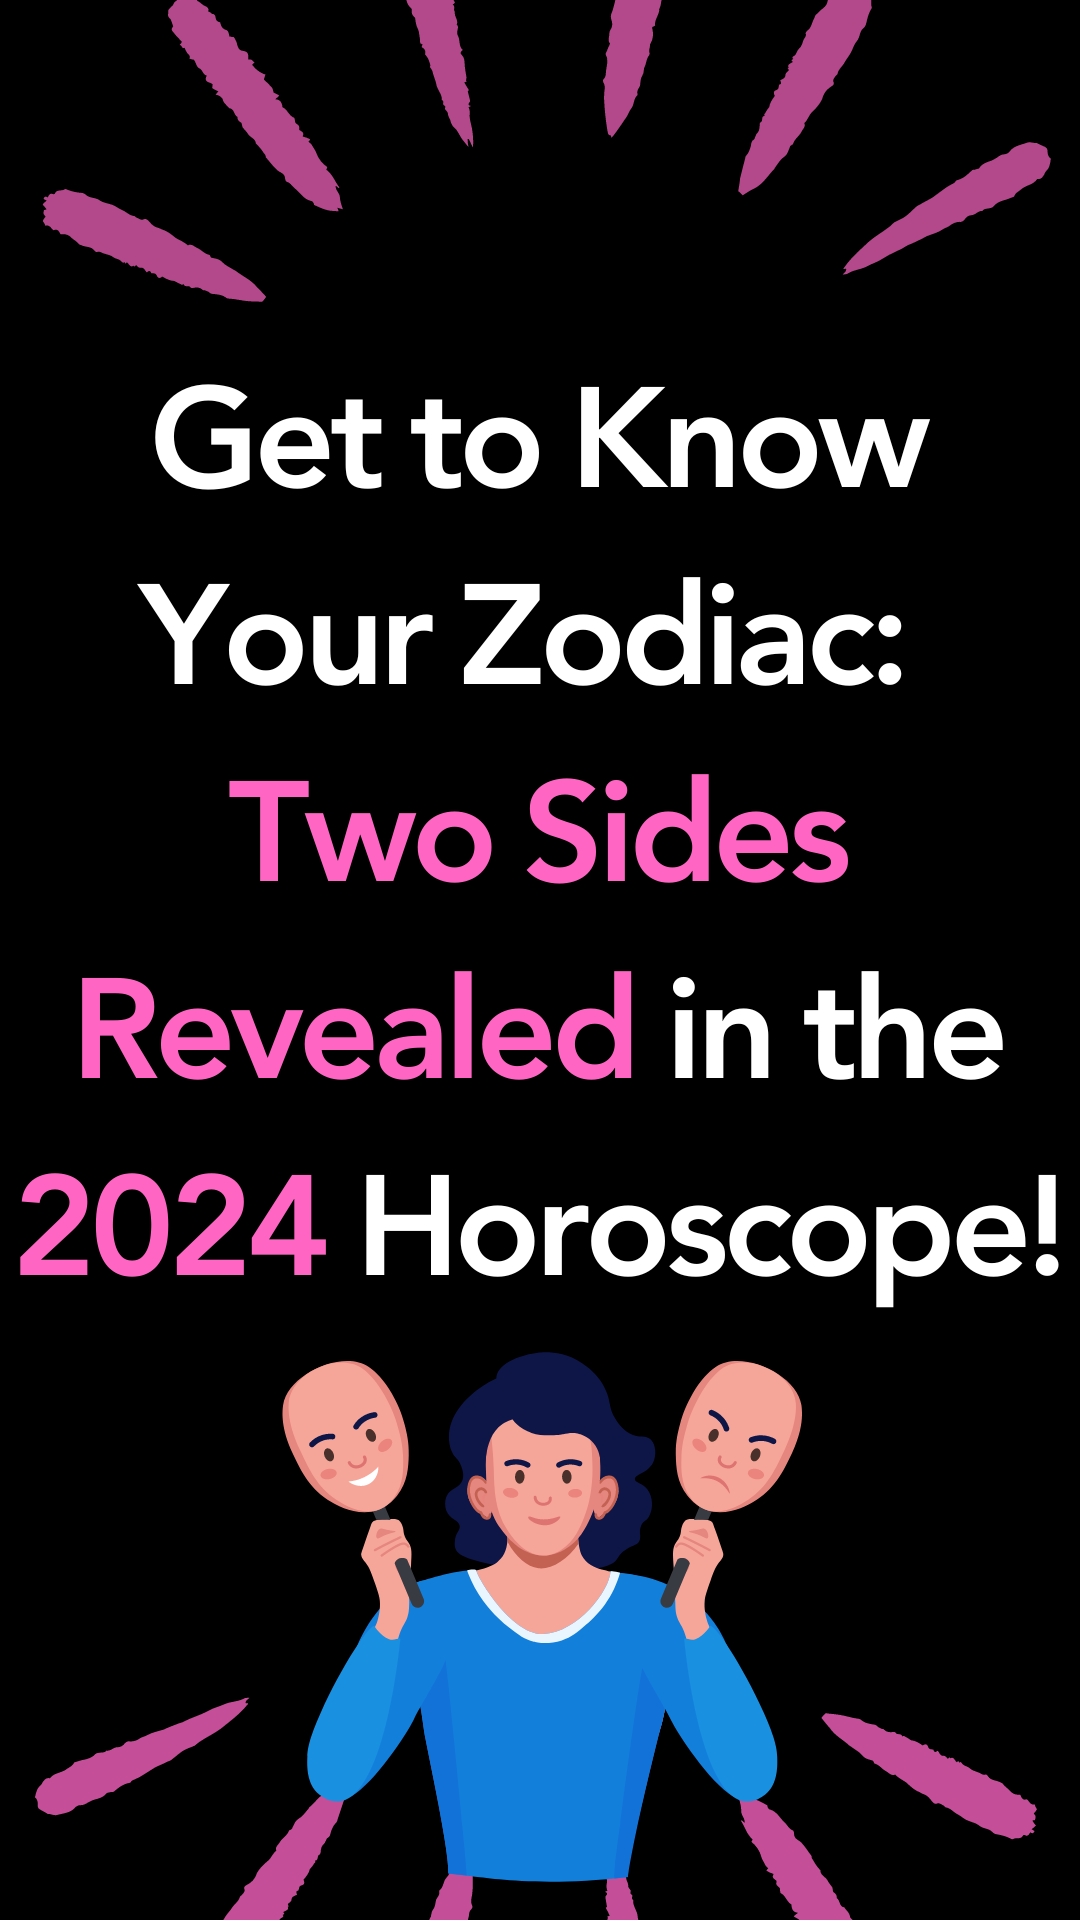 Get to Know Your Zodiac: Two Sides Revealed in the 2024 Horoscope!